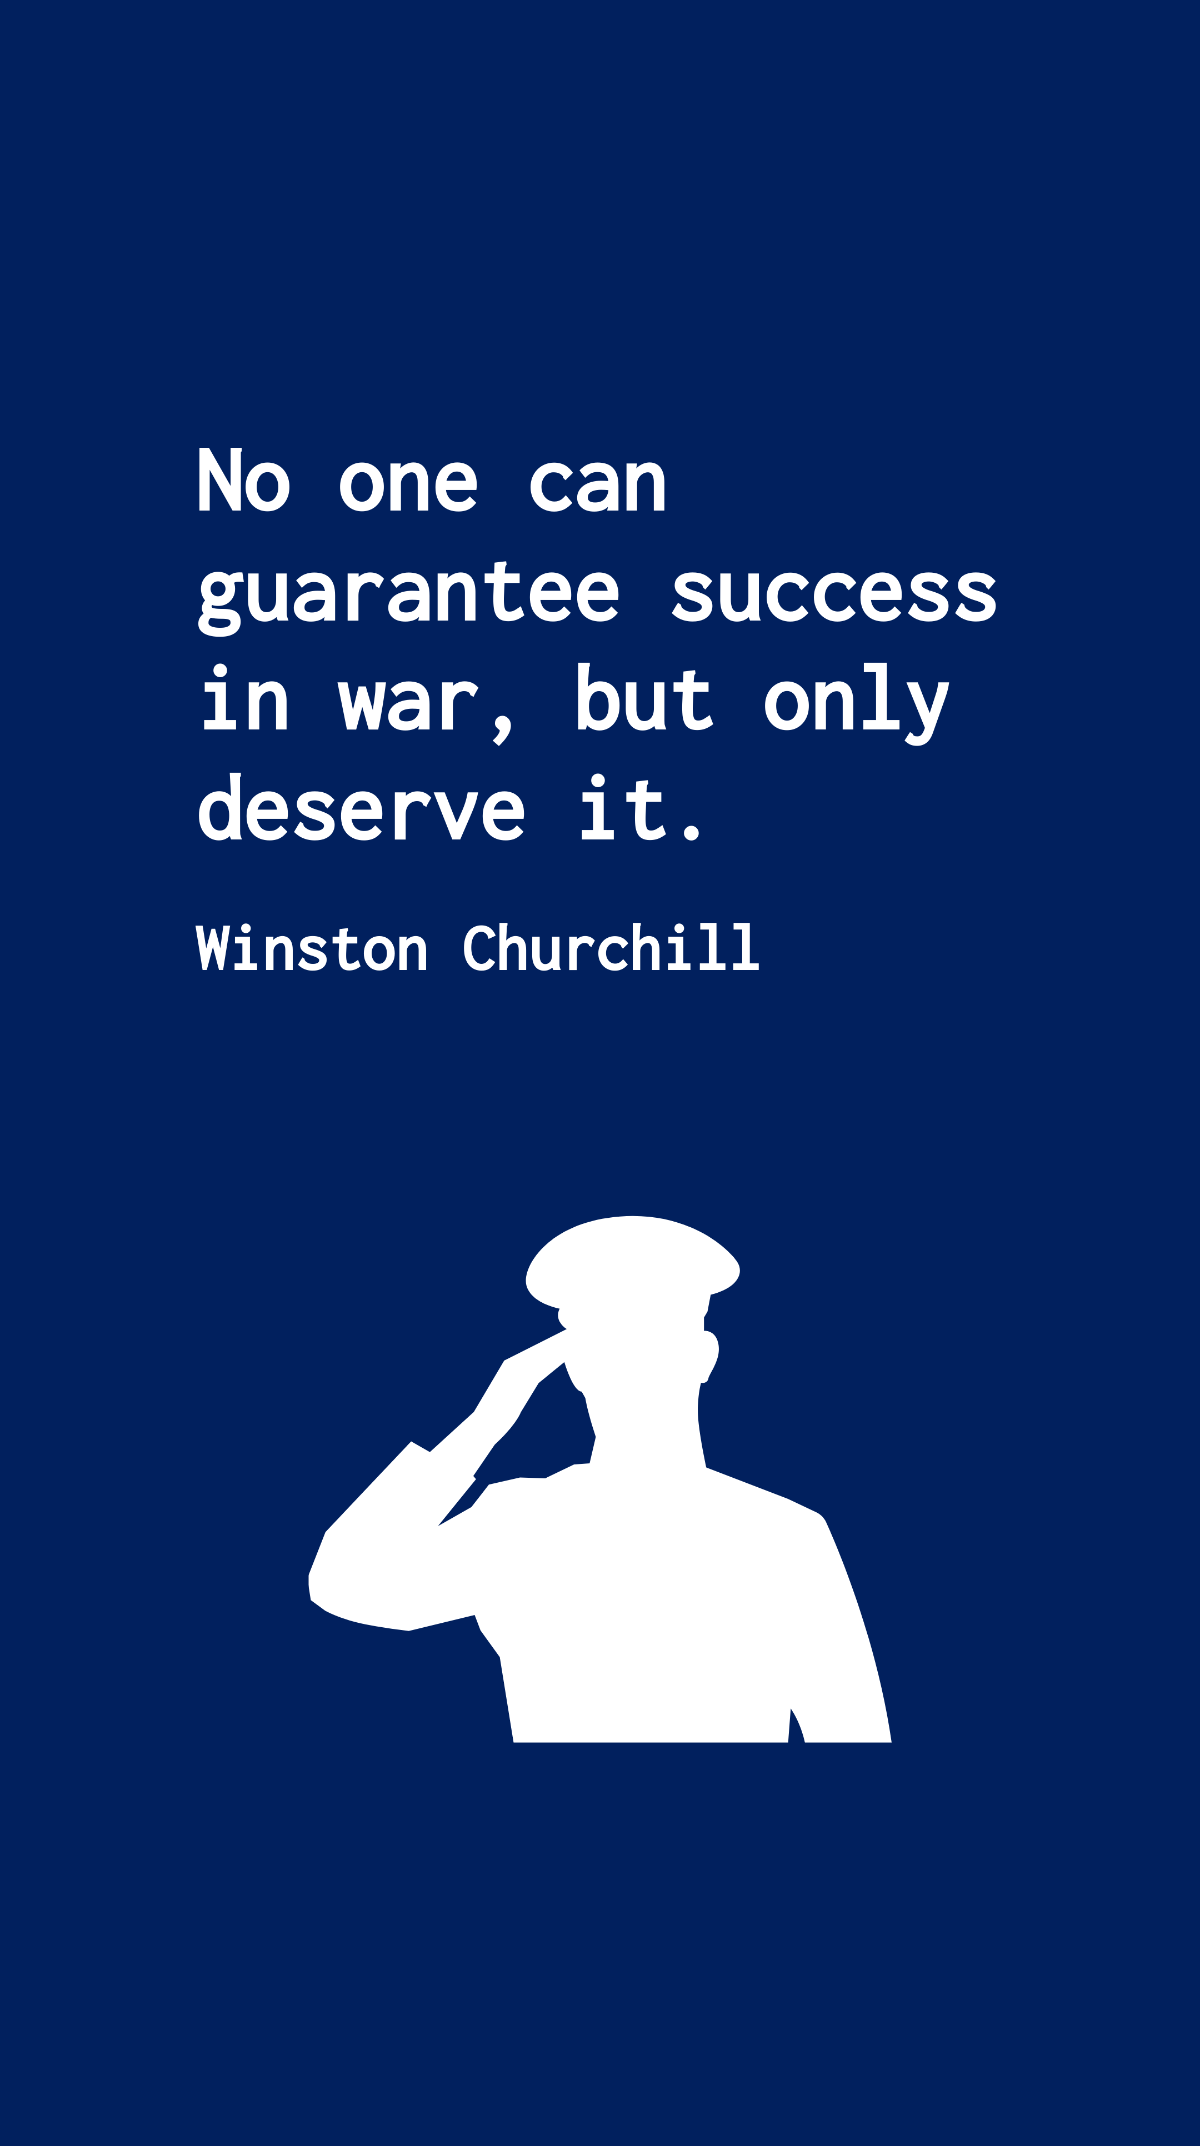 Winston Churchill - No one can guarantee success in war, but only deserve it. Template